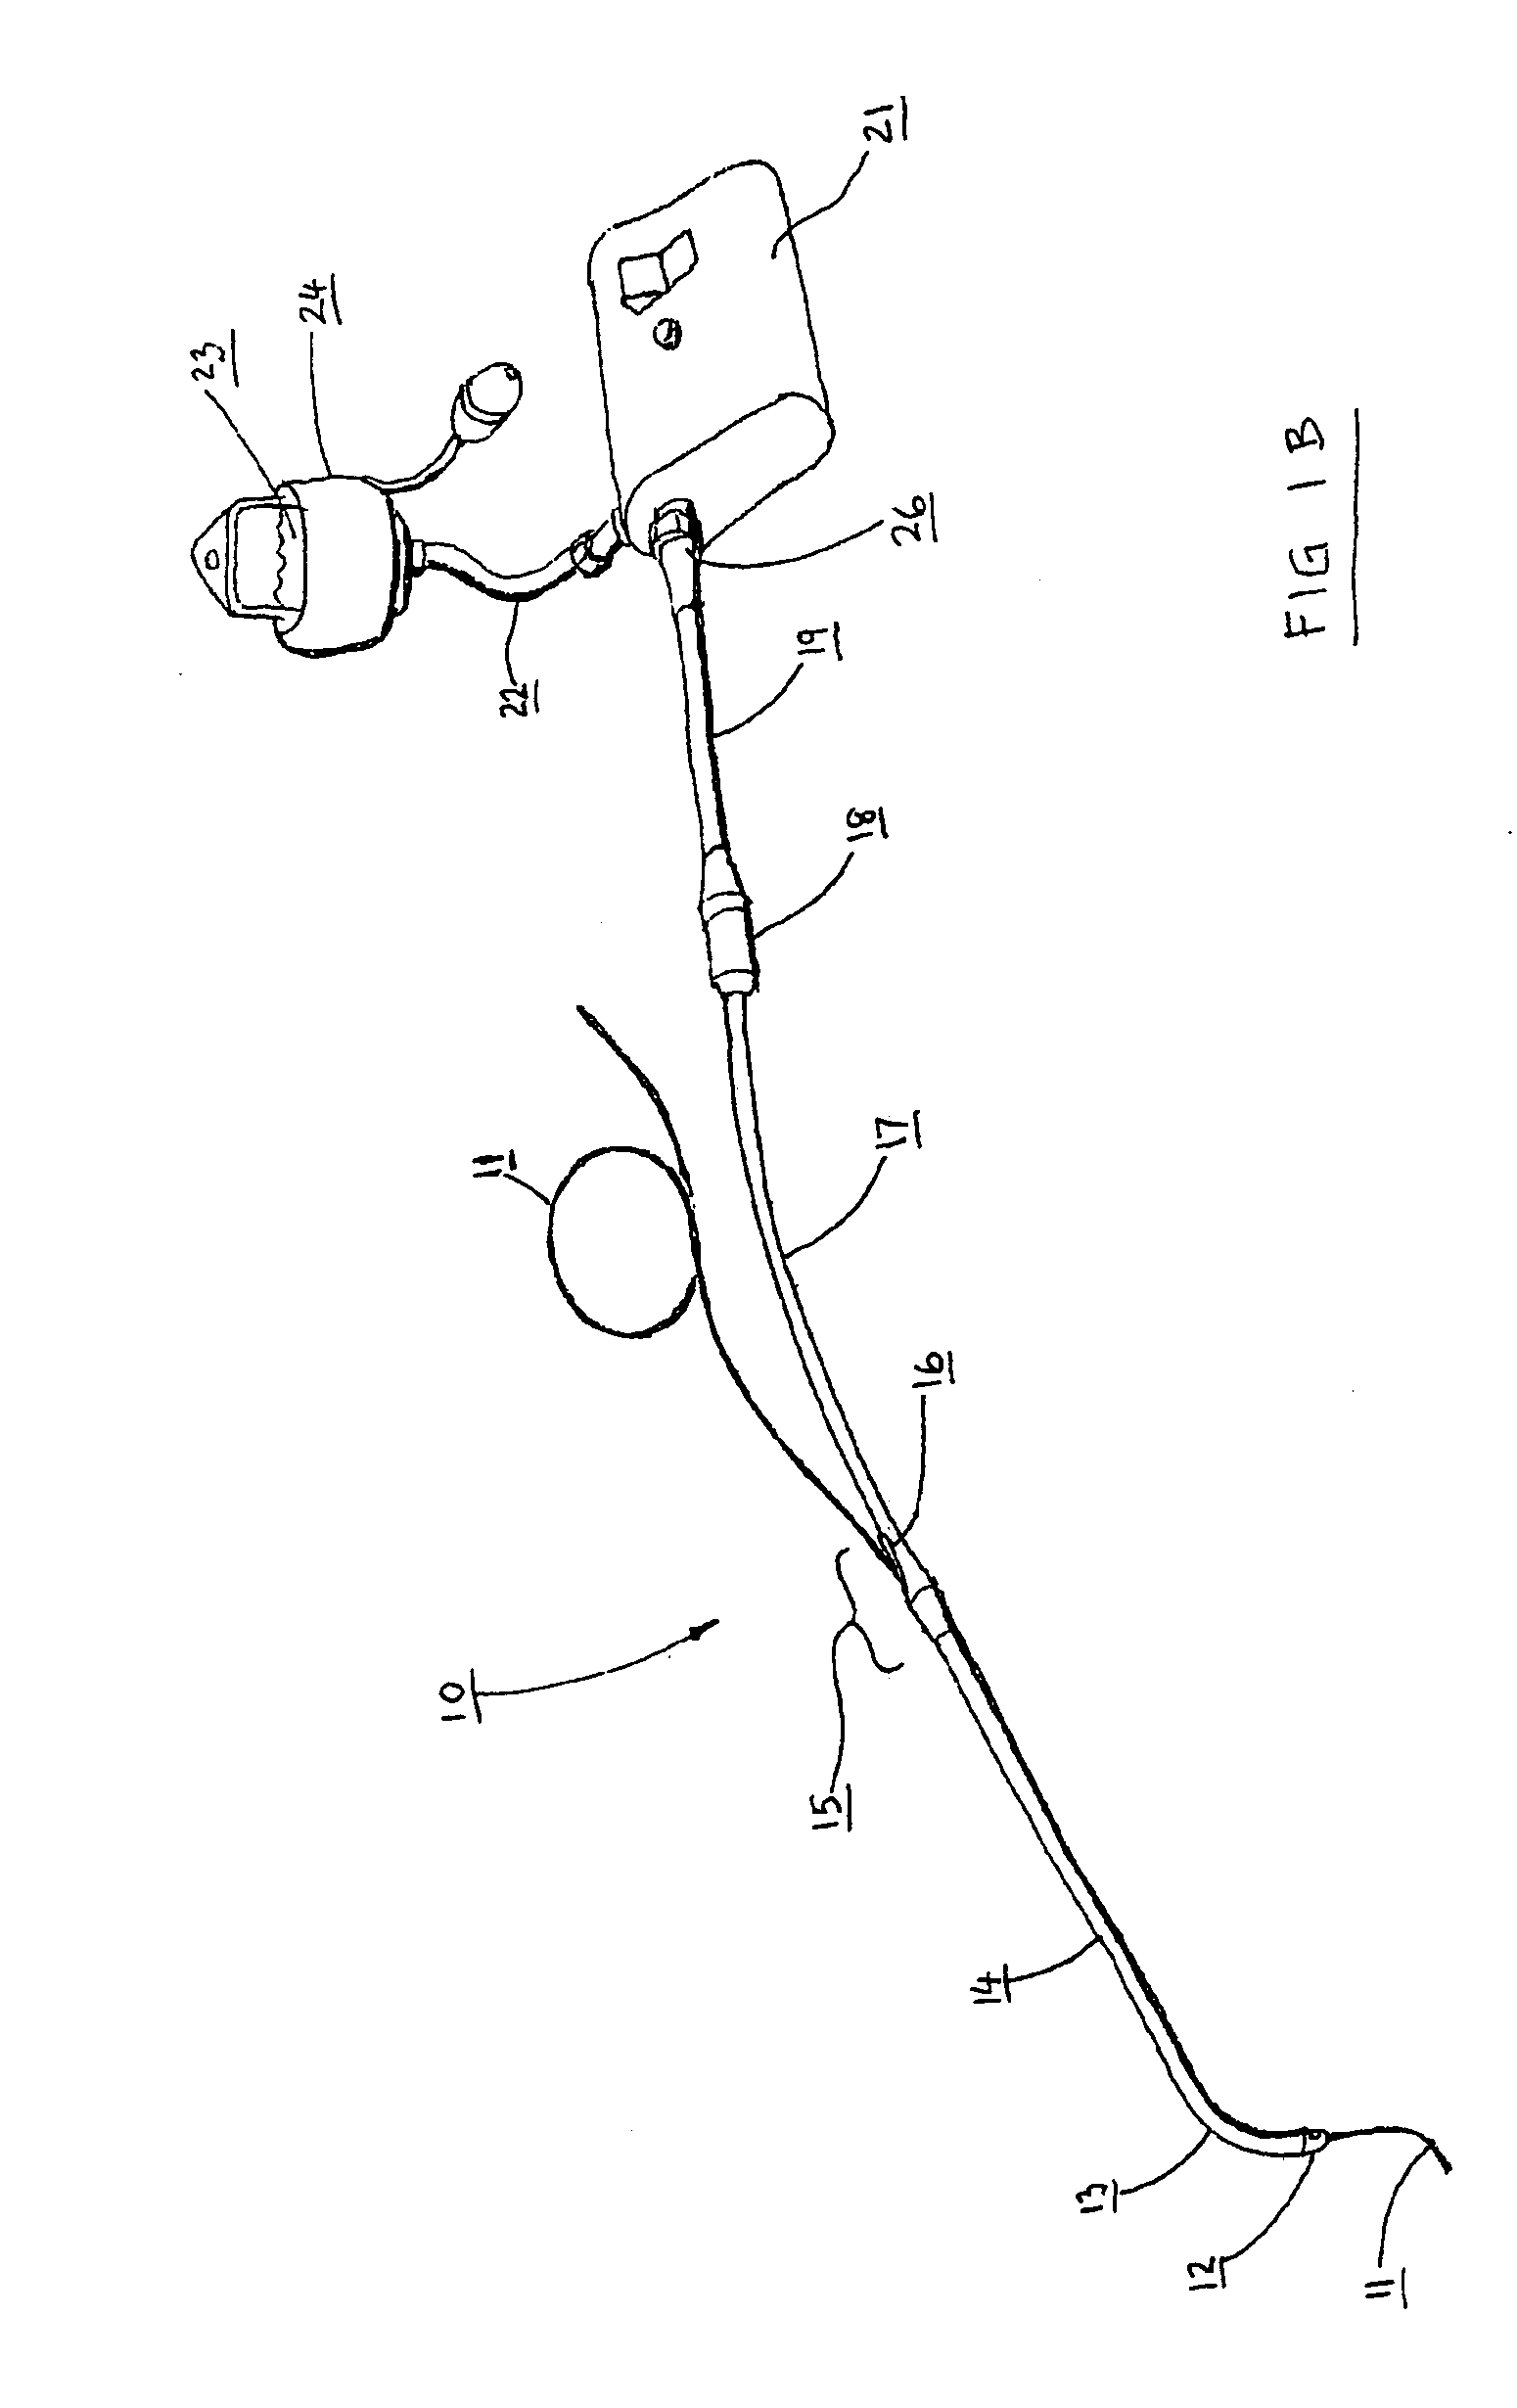 Catheter for conducting a procedure within a lumen, duct or organ of a living being